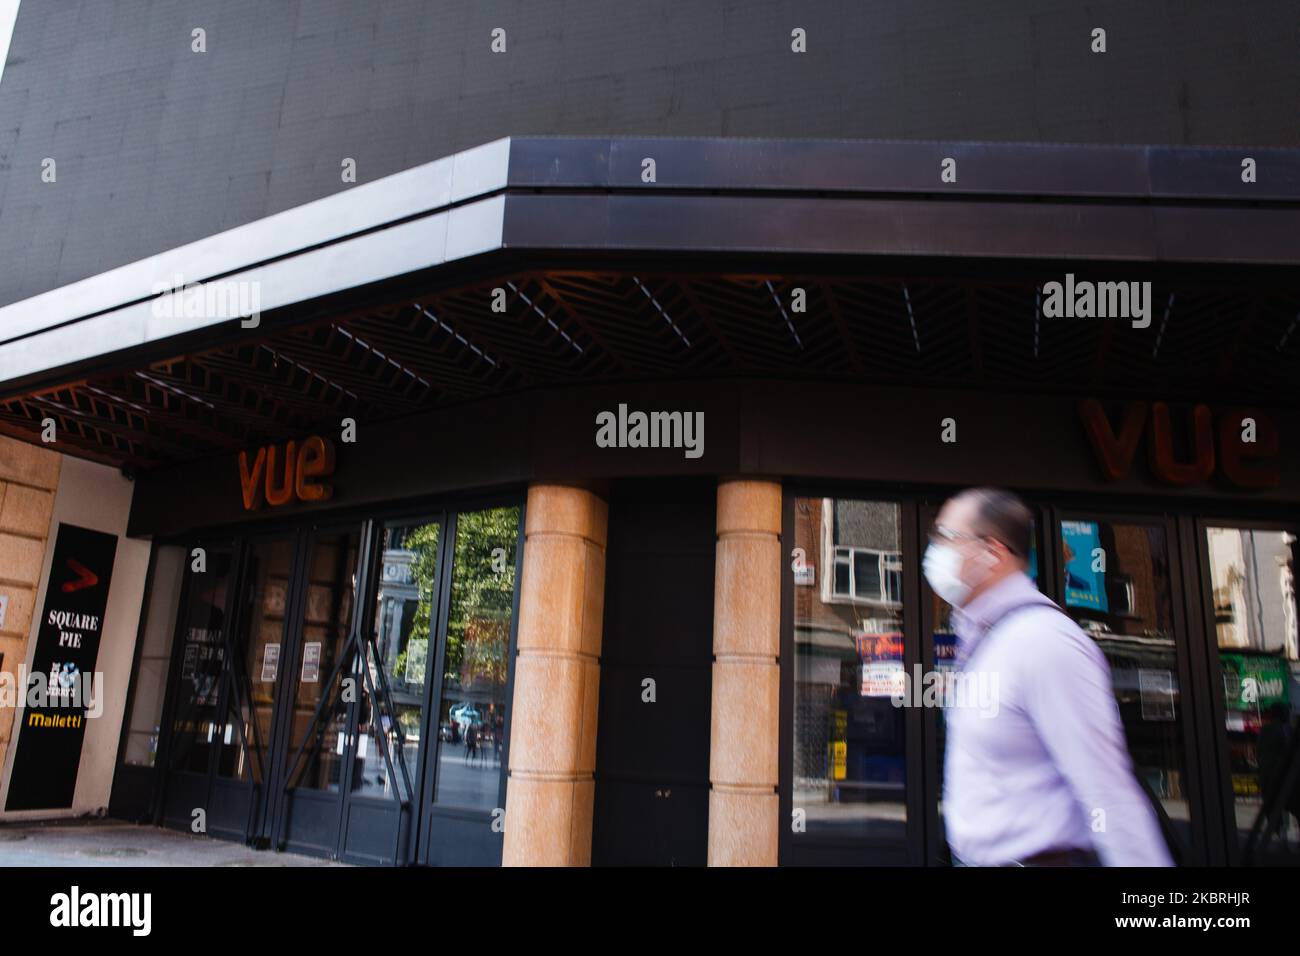 A man wearing a face mask walks past a closed branch of cinema chain Vue in Leicester Square in London, England, on June 23, 2020. British Prime Minister Boris Johnson announced today that the next stage of lockdown easing in England would proceed on schedule, with pubs, restaurants, hotels, hairdressers, theatres, cinemas, museums, galleries, libraries, theme parks and zoos allowed to reopen from July 4. The two-metre social distancing rule is also to be halved from the same date, with people encouraged to take additional mitigation actions, such as wearing face coverings, when close together Stock Photo